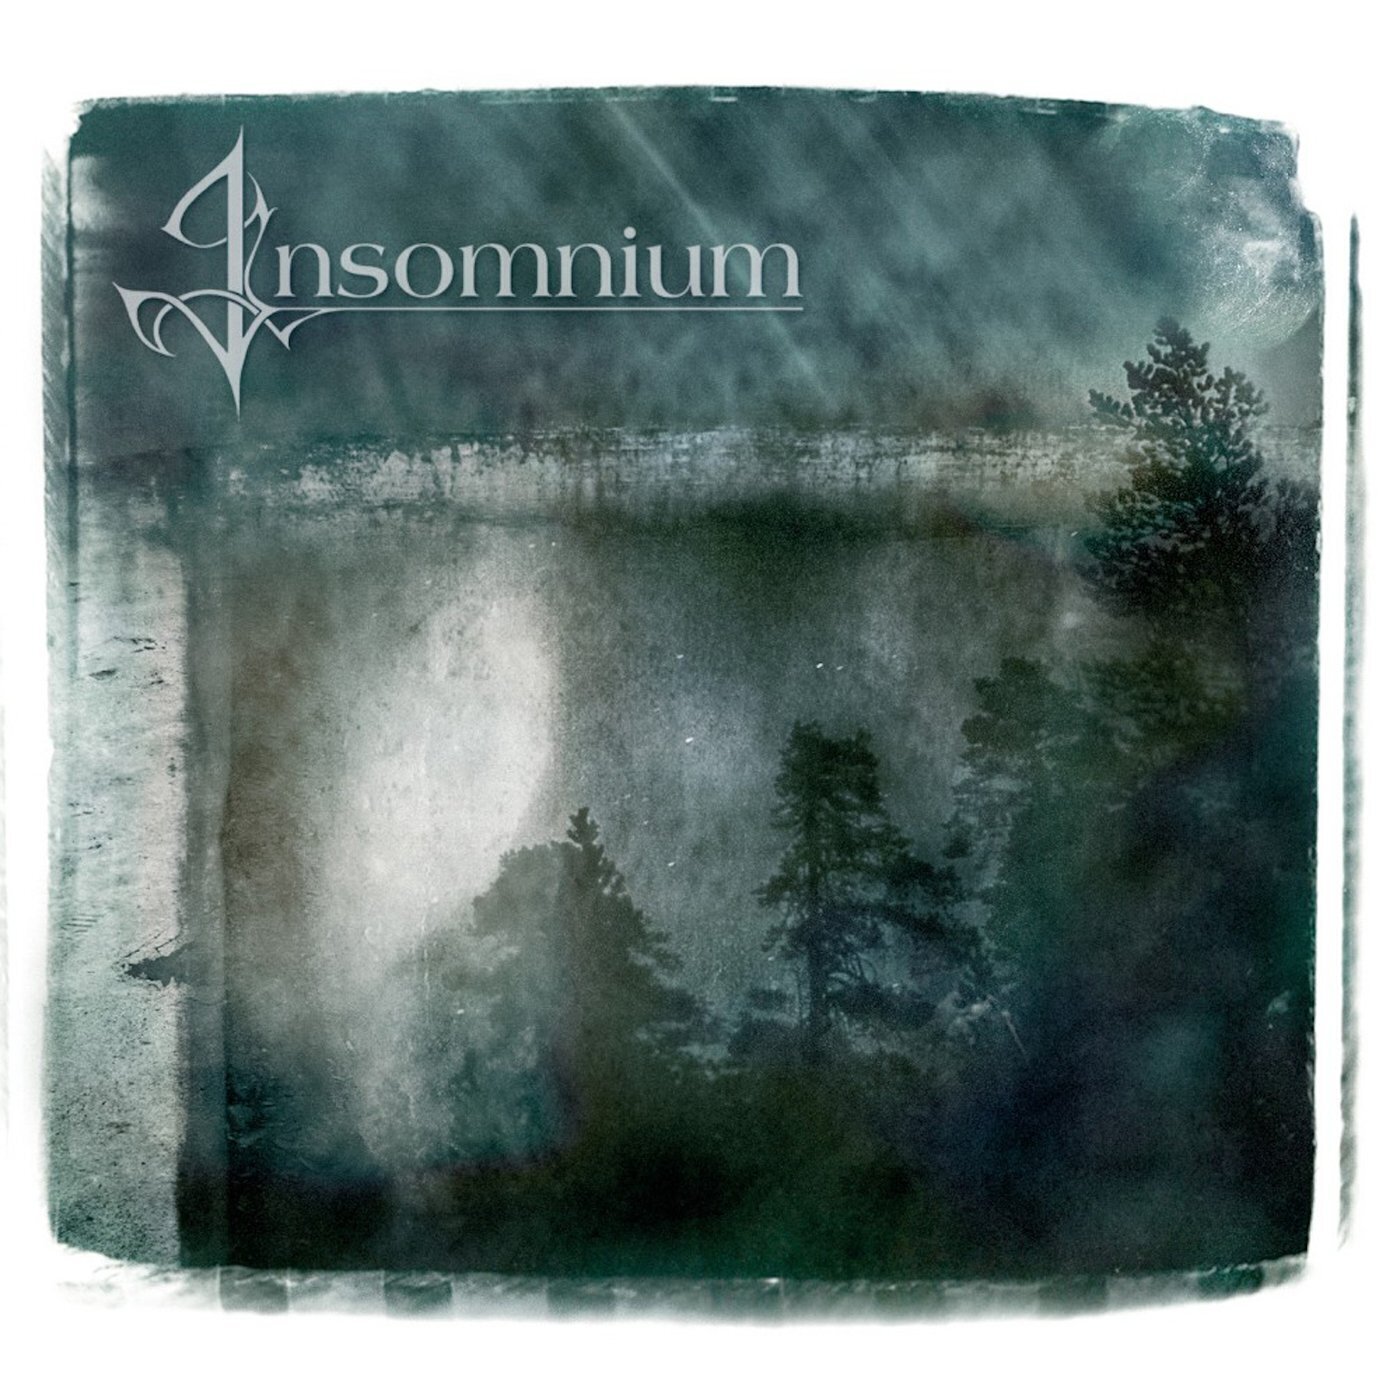 Vinylskiva Insomnium - Since The Day It All Came (2 LP)